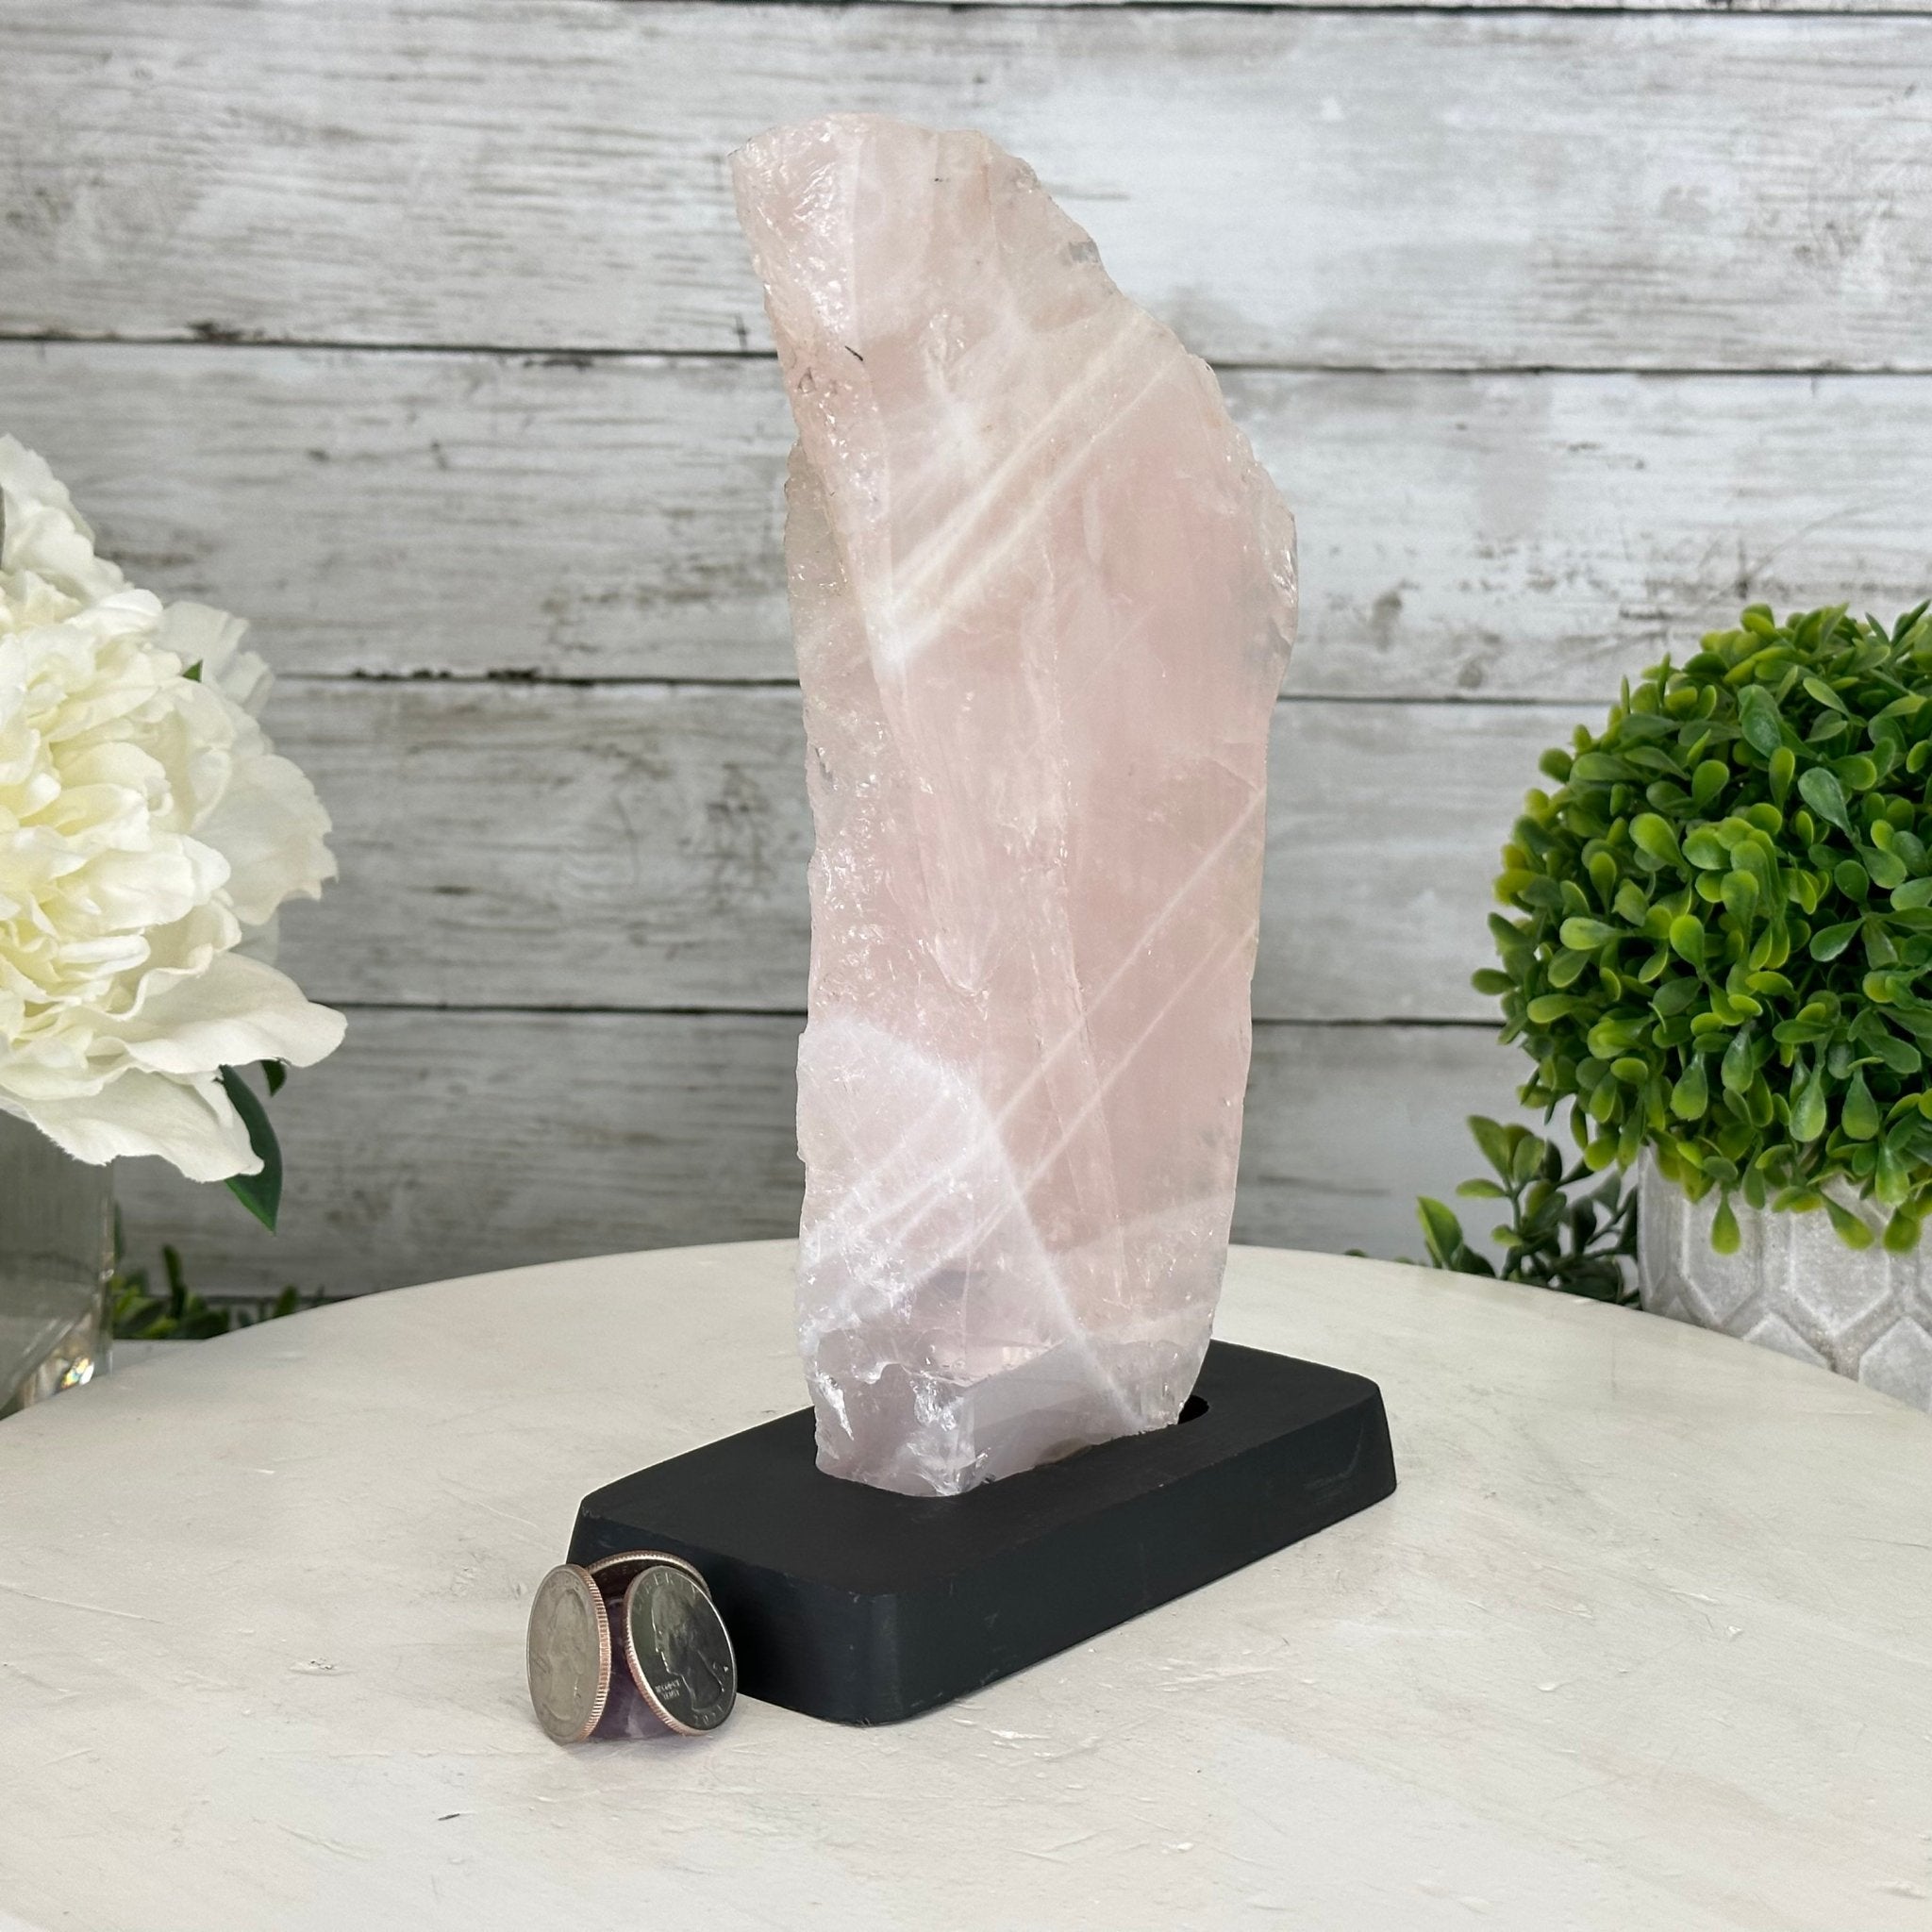 Rose Quartz Polished Slice with Rough Edges on a Wood Base Model 9.25" Tall Model #6100RQ-009 by Brazil Gems - Brazil GemsBrazil GemsRose Quartz Polished Slice with Rough Edges on a Wood Base Model 9.25" Tall Model #6100RQ-009 by Brazil GemsSlices on Wood Bases6100RQ-009